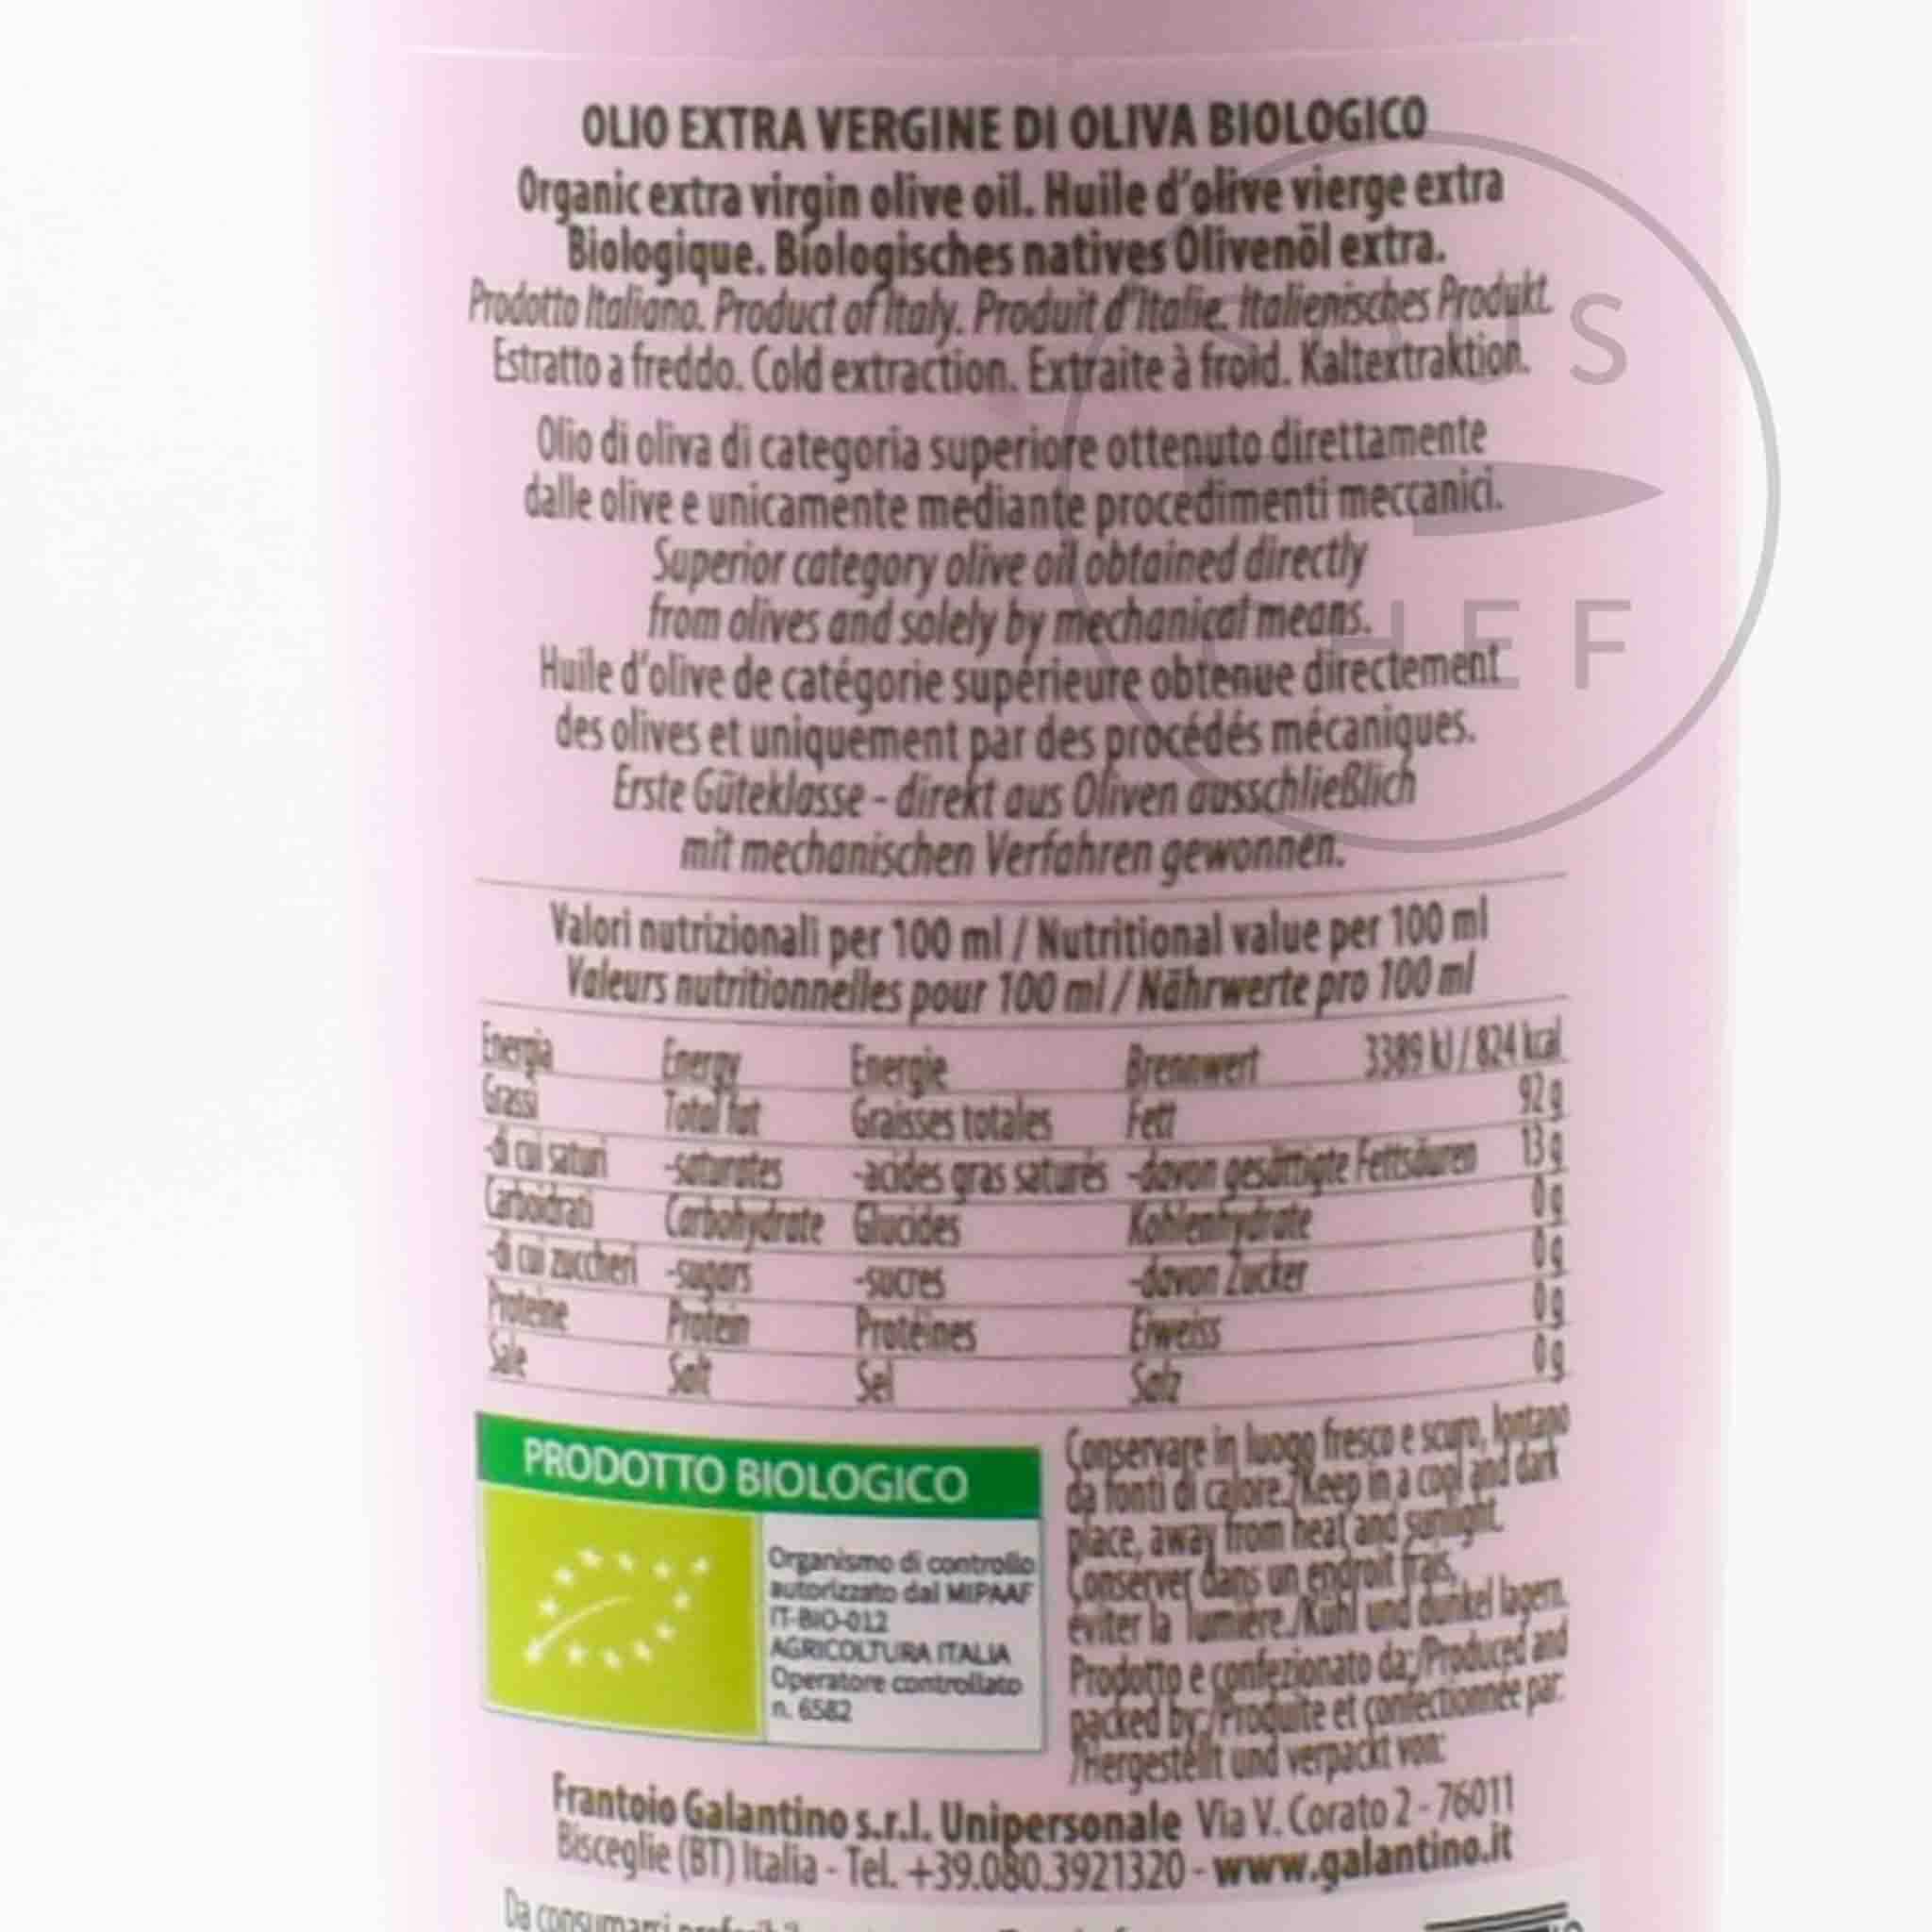 Galantino Baby Organic Extra Virgin Olive Oil in Pink Bottle, 250ml